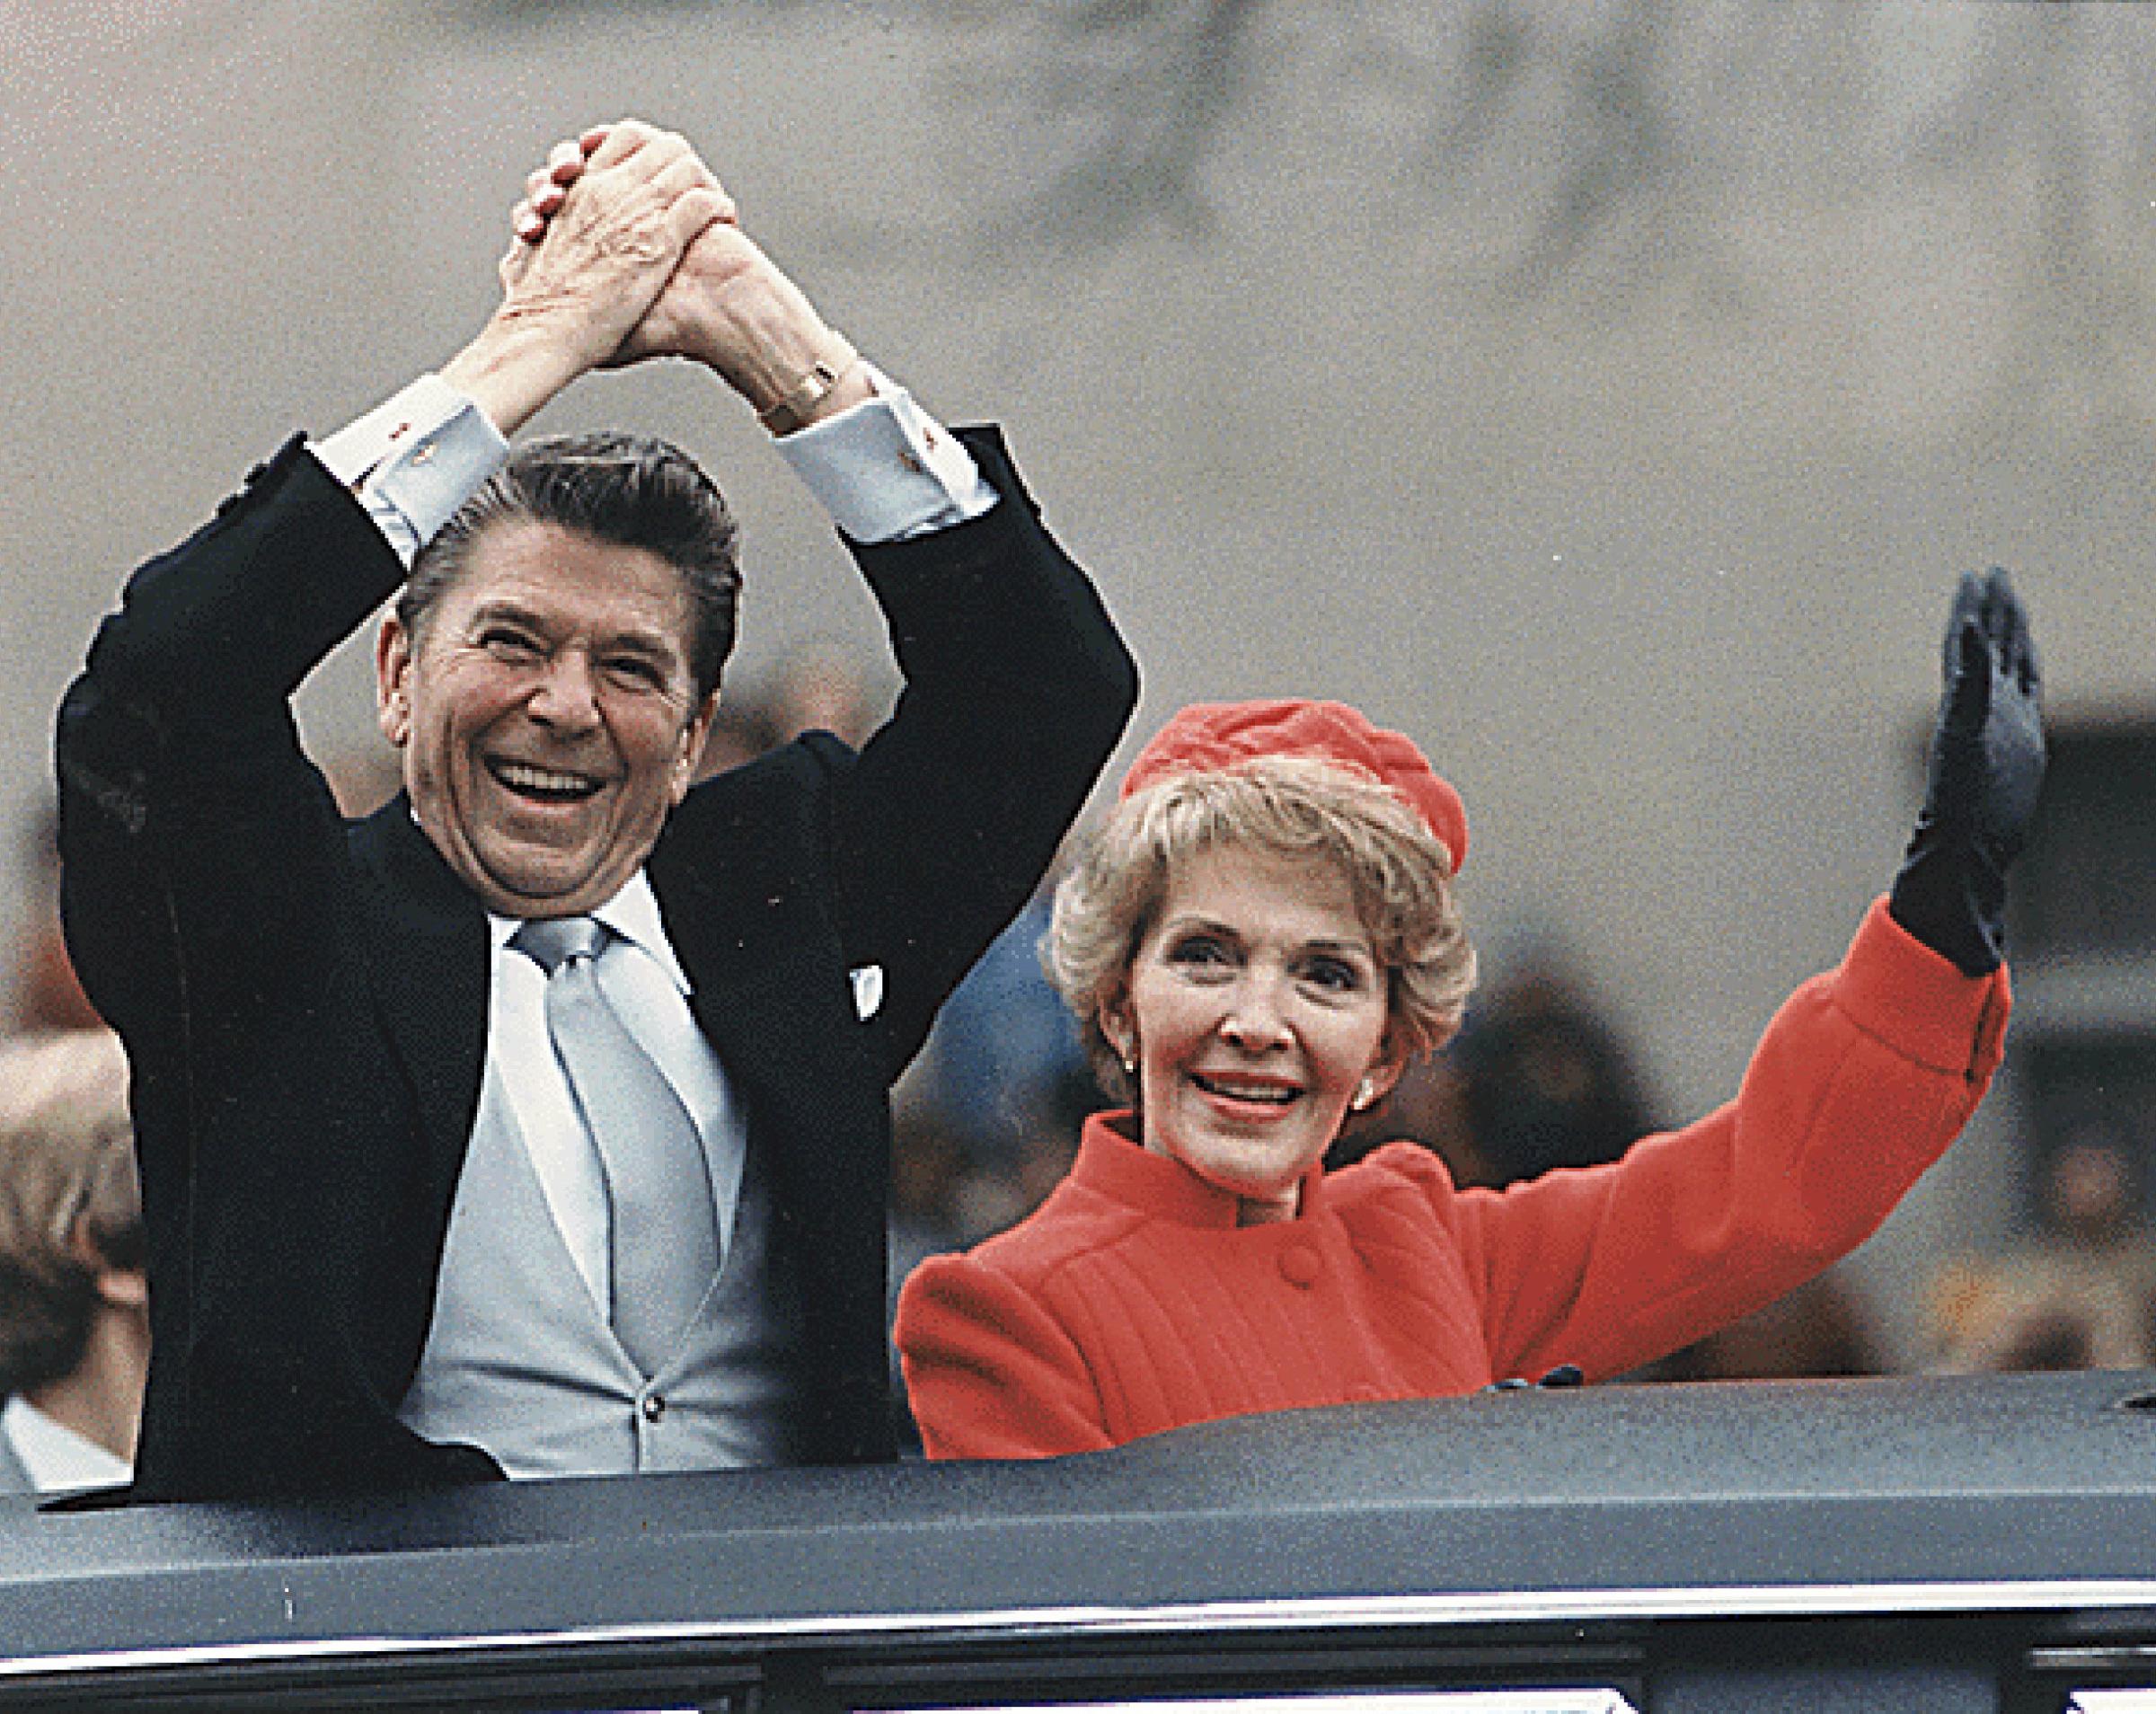 President Ronald Reagan and First Lady Nancy Reagan wave to well-wishers during the Inaugural Parade in Washington, DC on January 20, 1981.